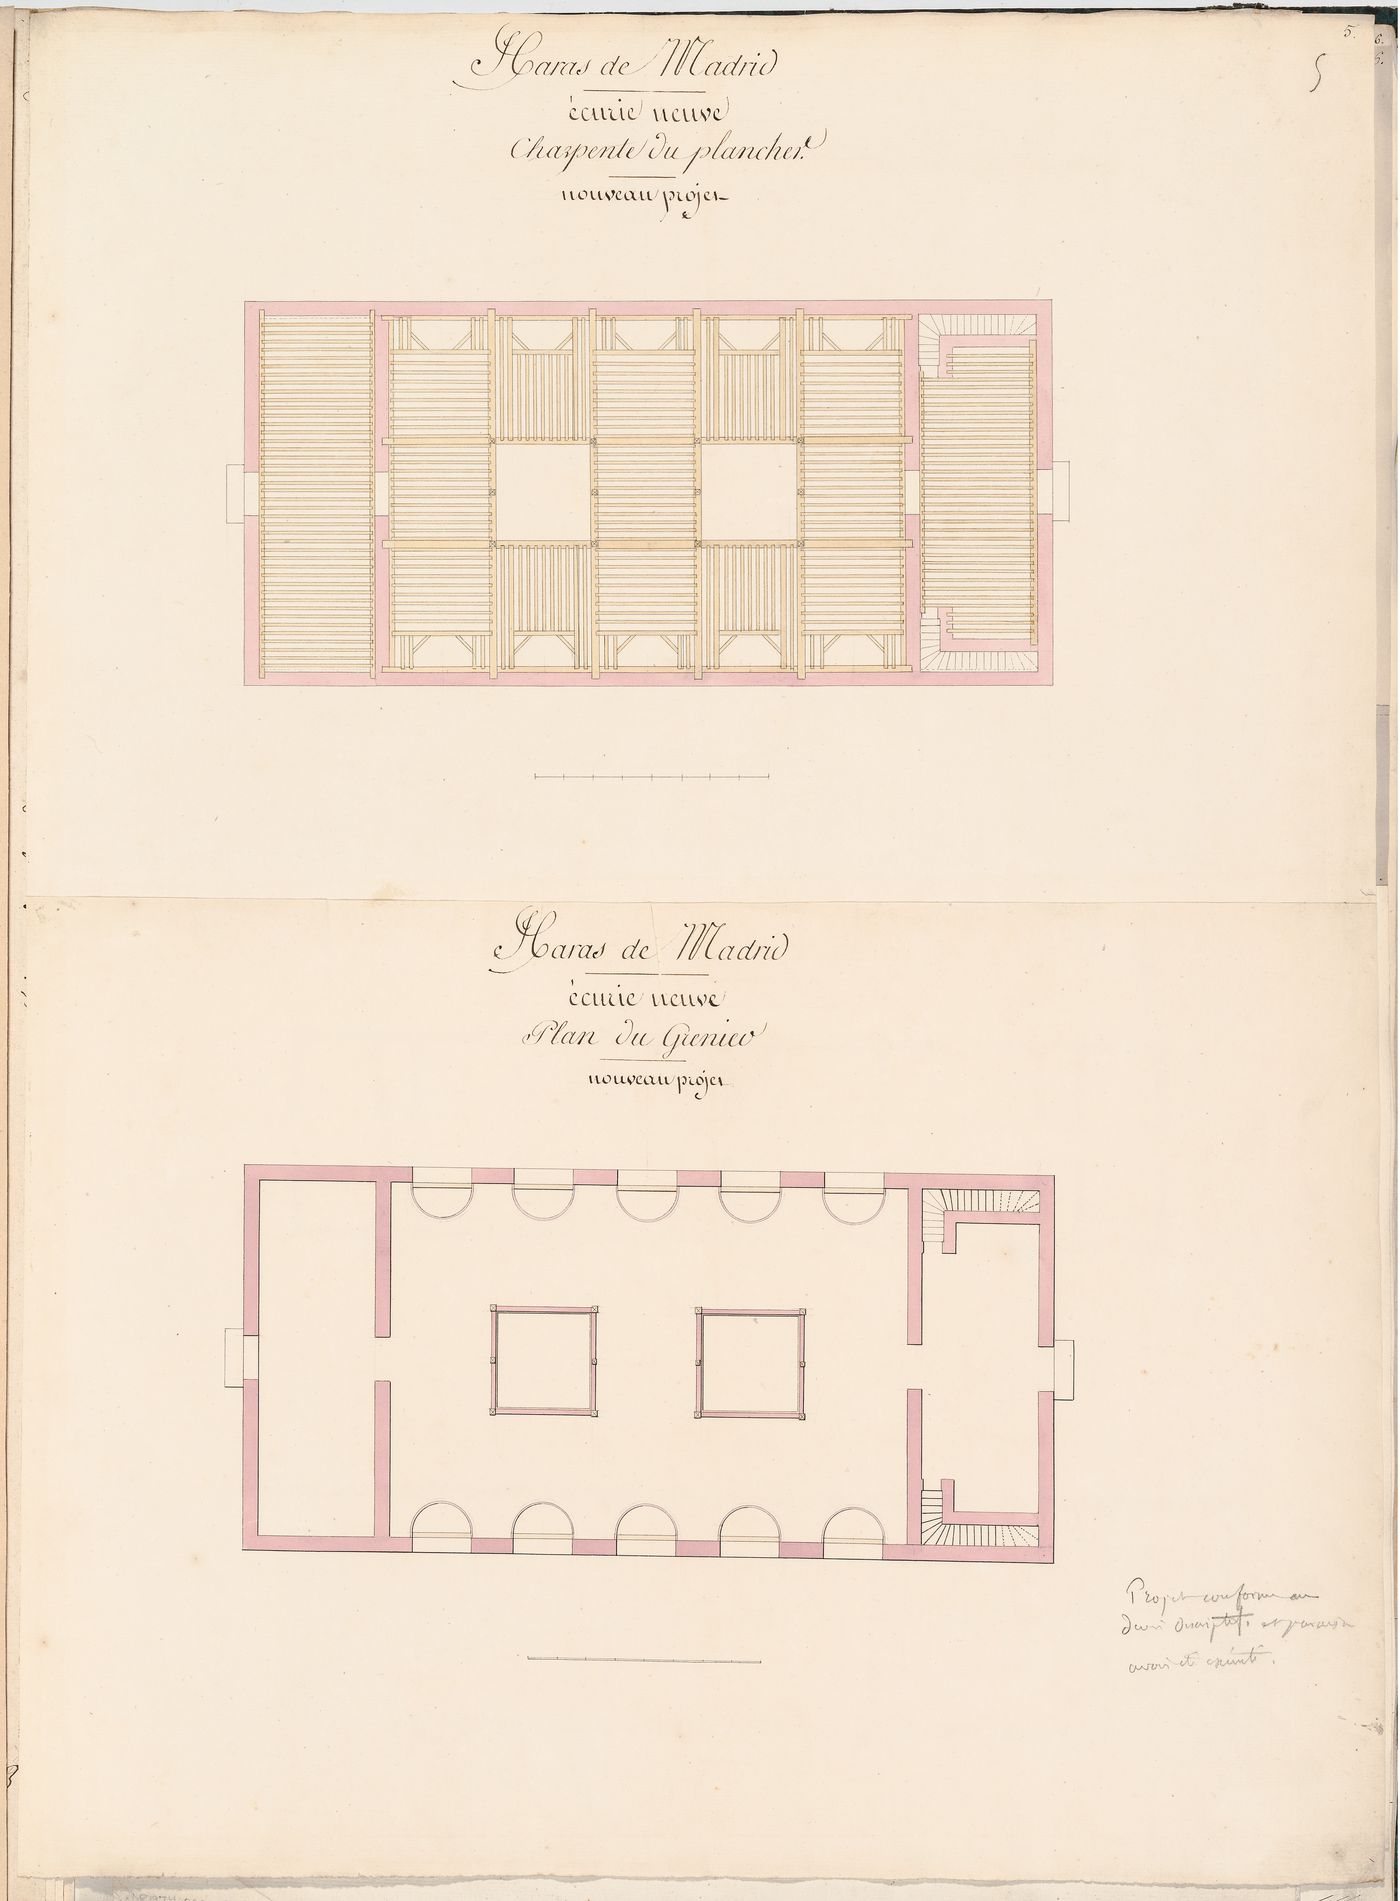 Project for a stud-farm "Haras de Madrid", Bois de Boulogne: Floor plan and framing plan for a grainery and stable